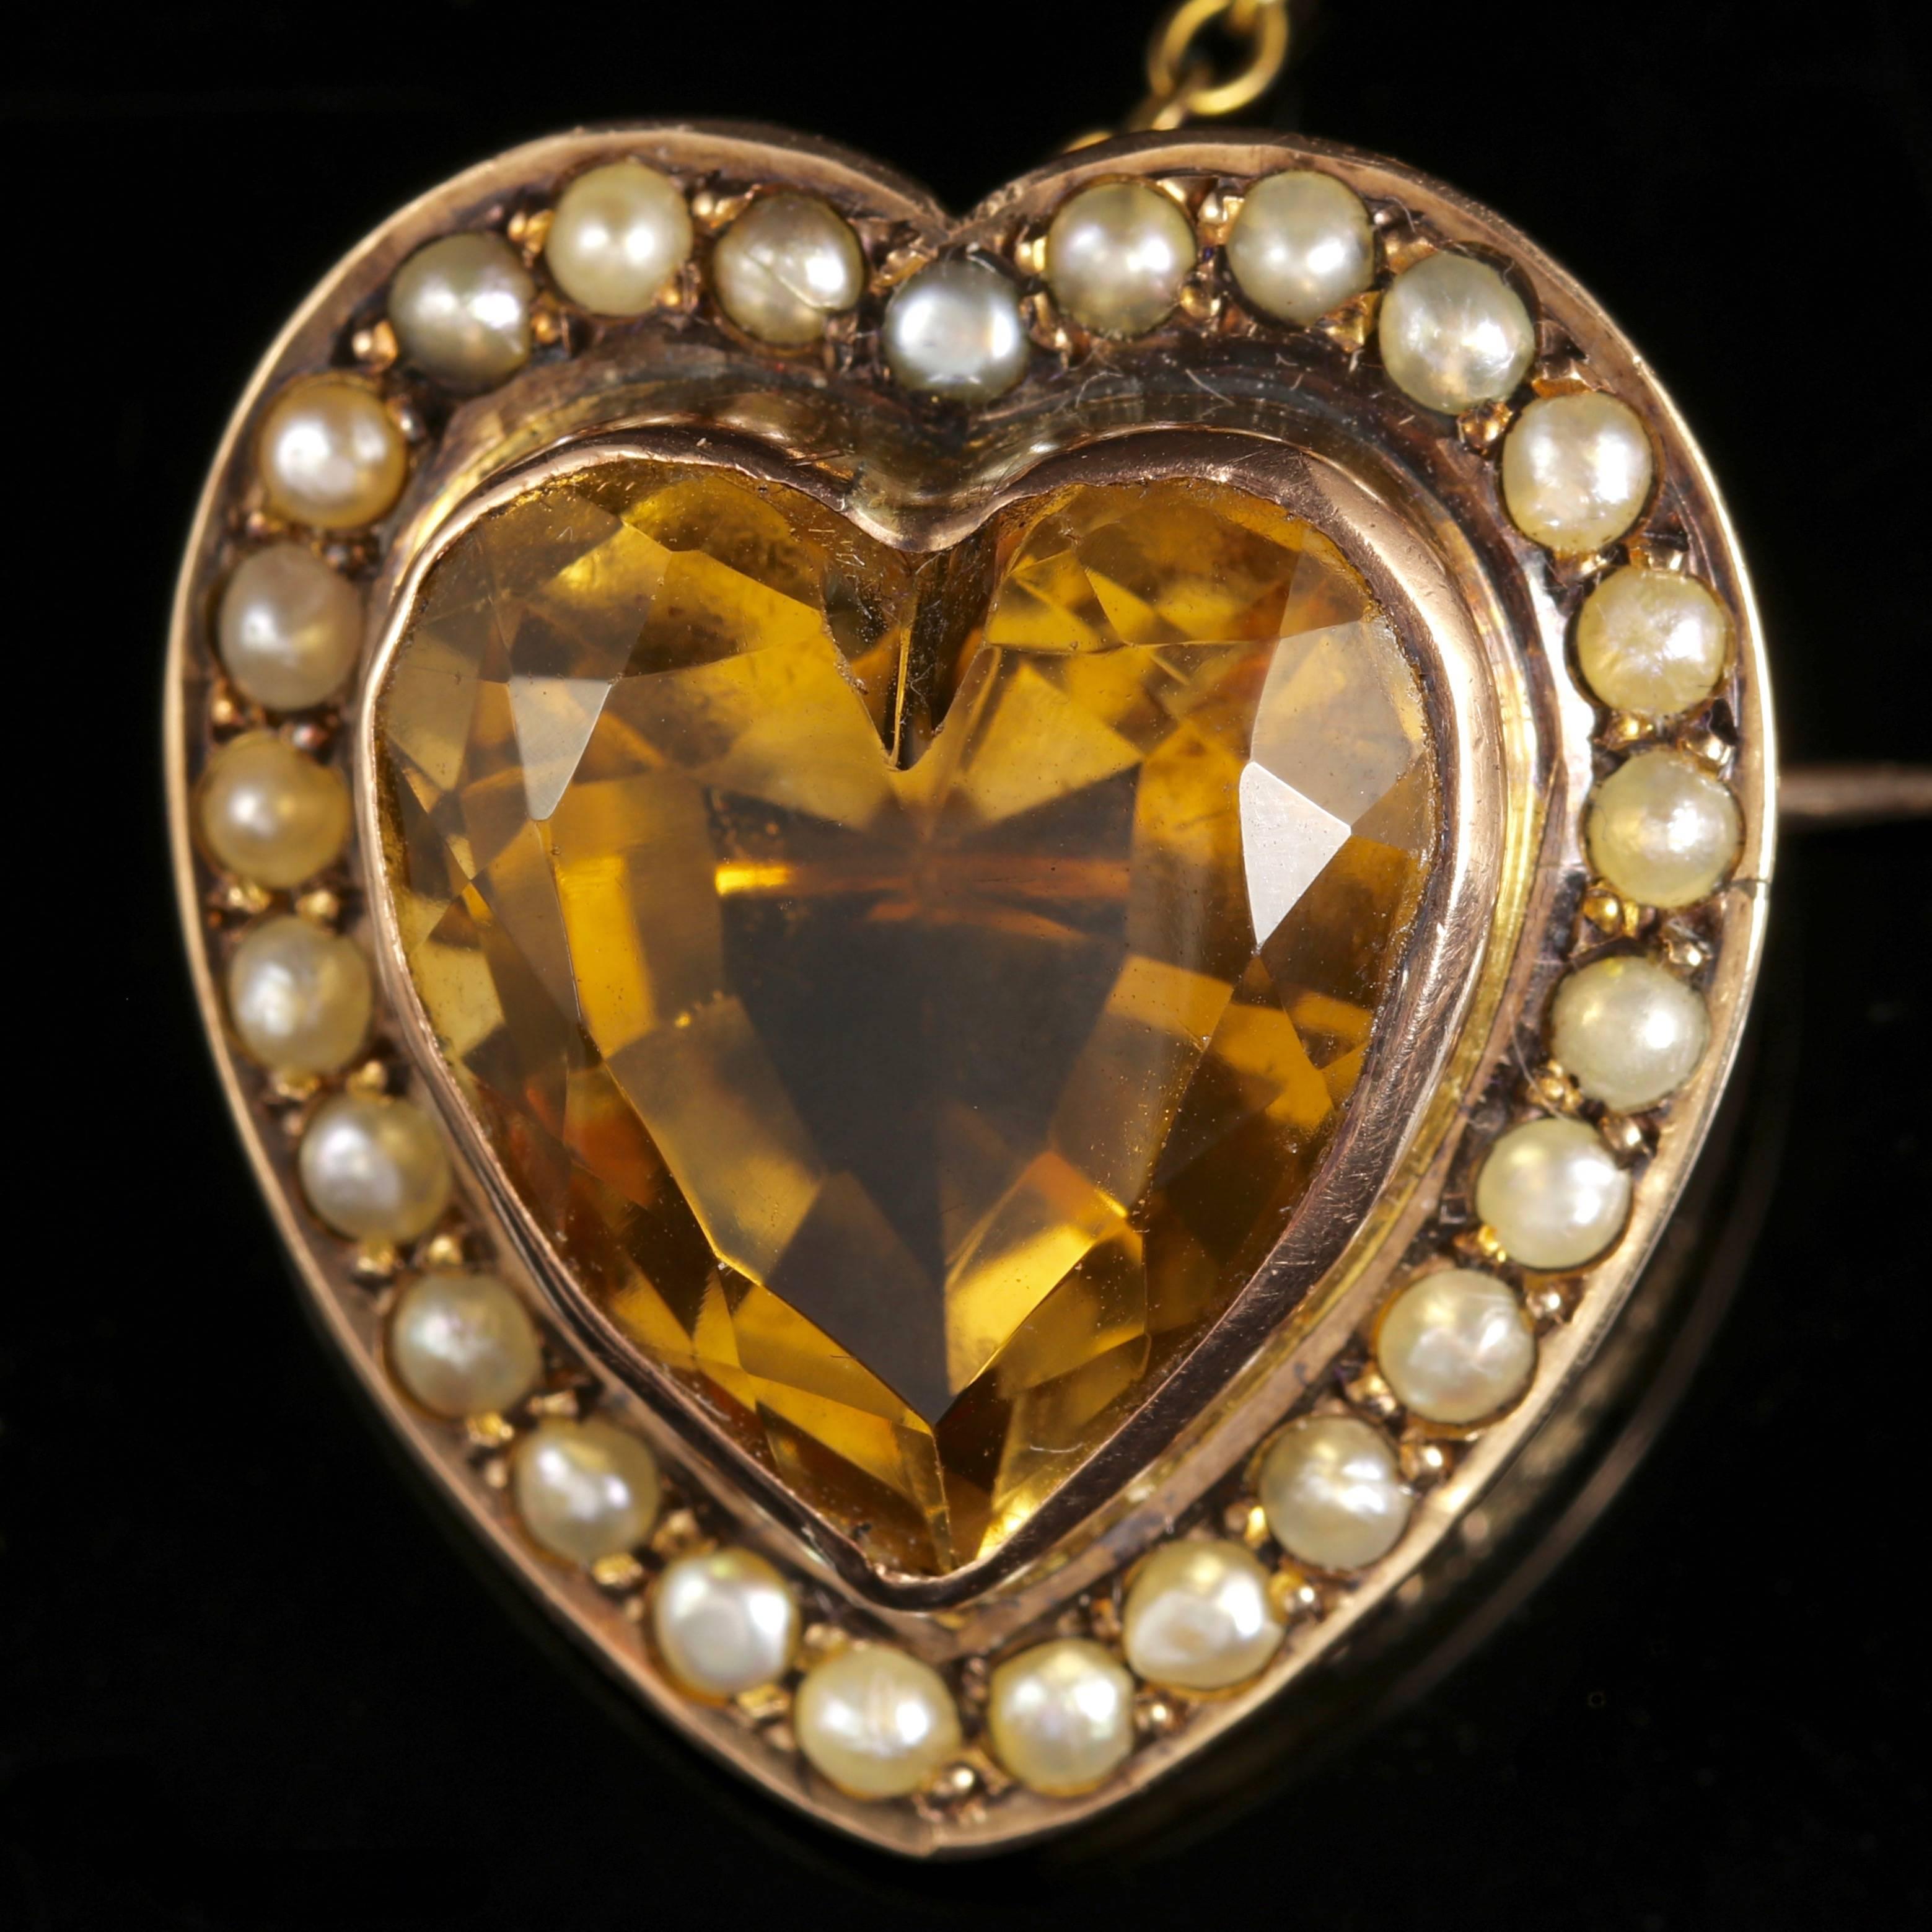 This genuine Victorian 15ct Yellow Gold heart brooch is set with a lovely rich Citrine and Pearls.

Circa 1880. 

The Citrine is hand cut into a heart, beautifully polished and surrounded by a halo of Pearls.

The central heart is over 10ct in size